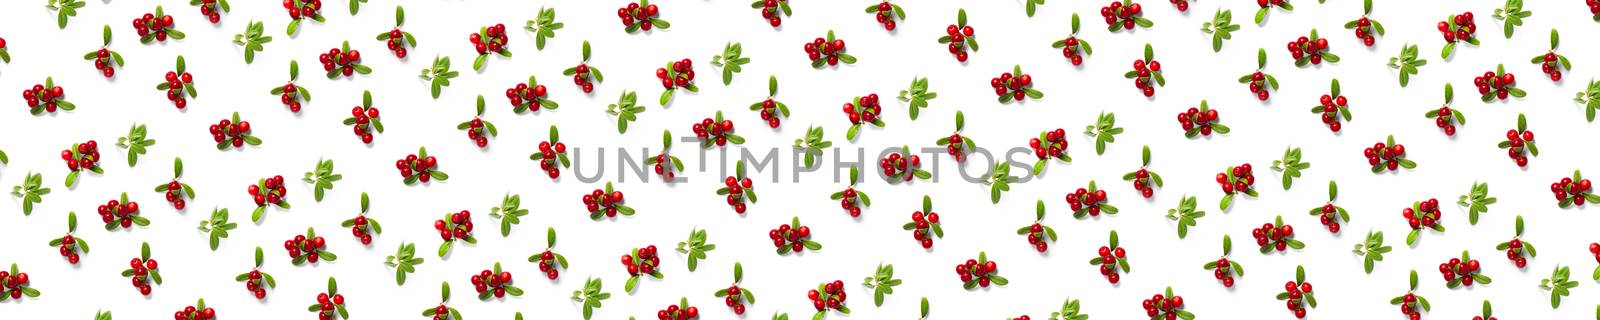 Lingonberry background on white backdrop. Fresh cowberries or cranberries with leaves as background by PhotoTime